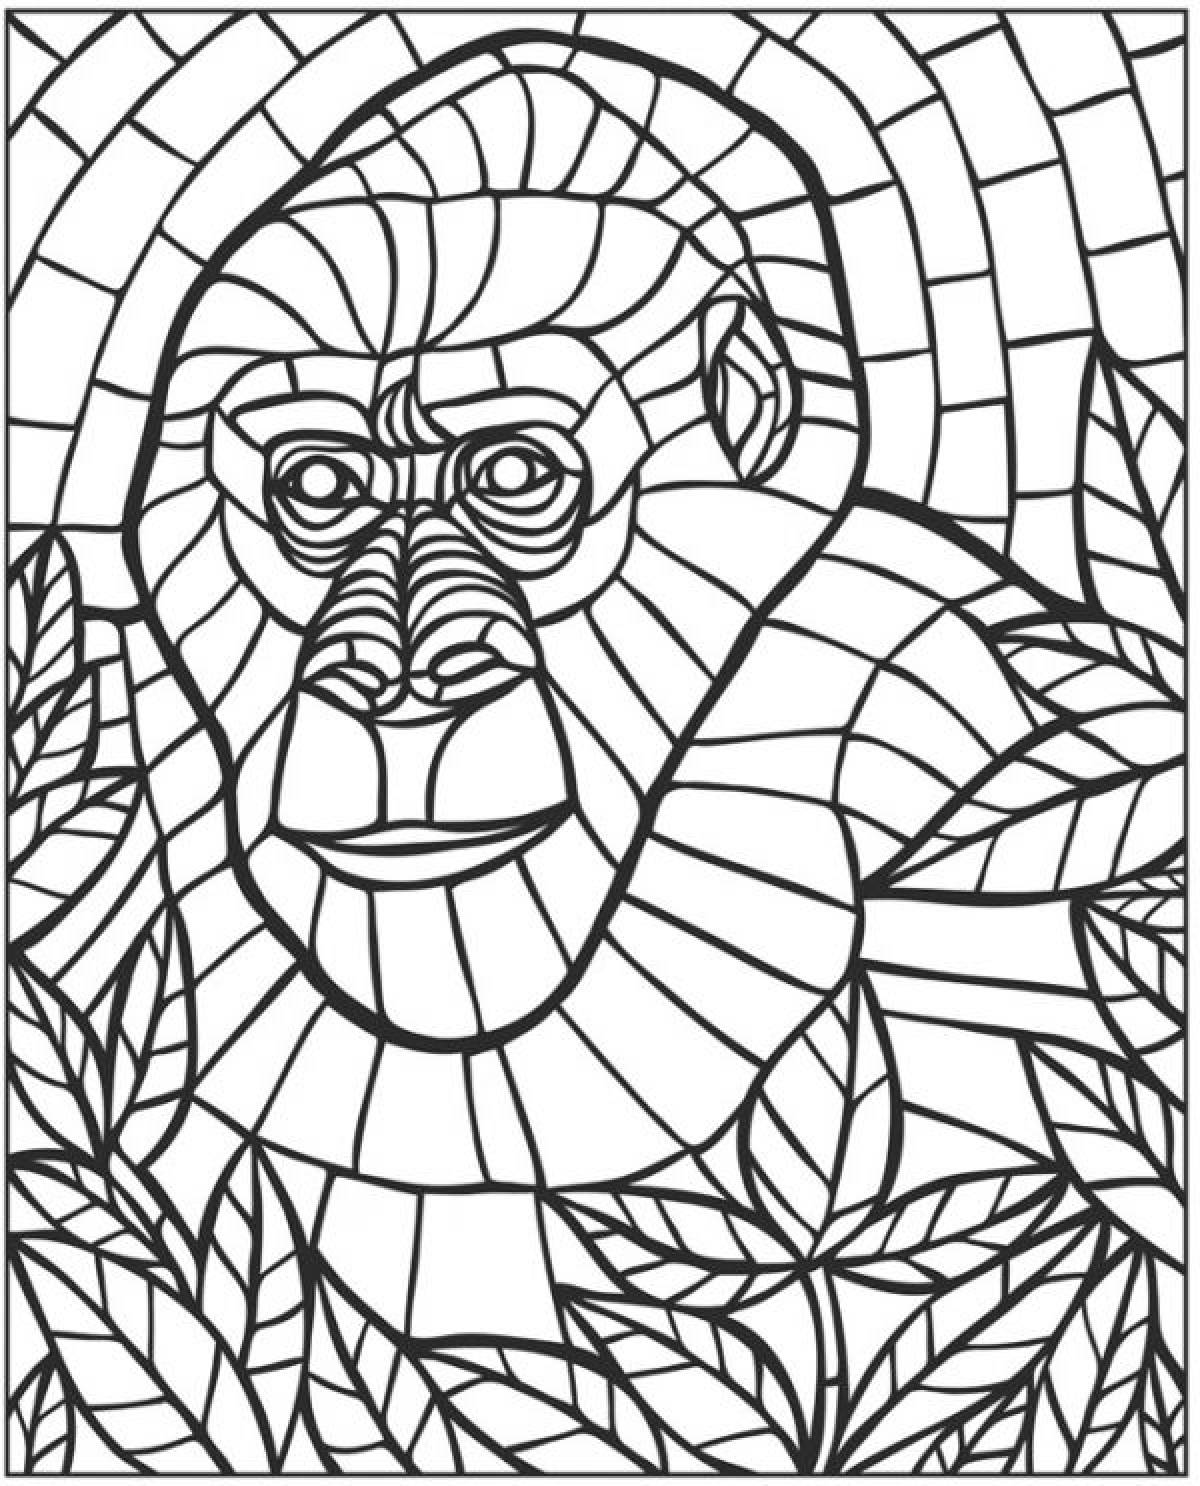 Stained glass monkey